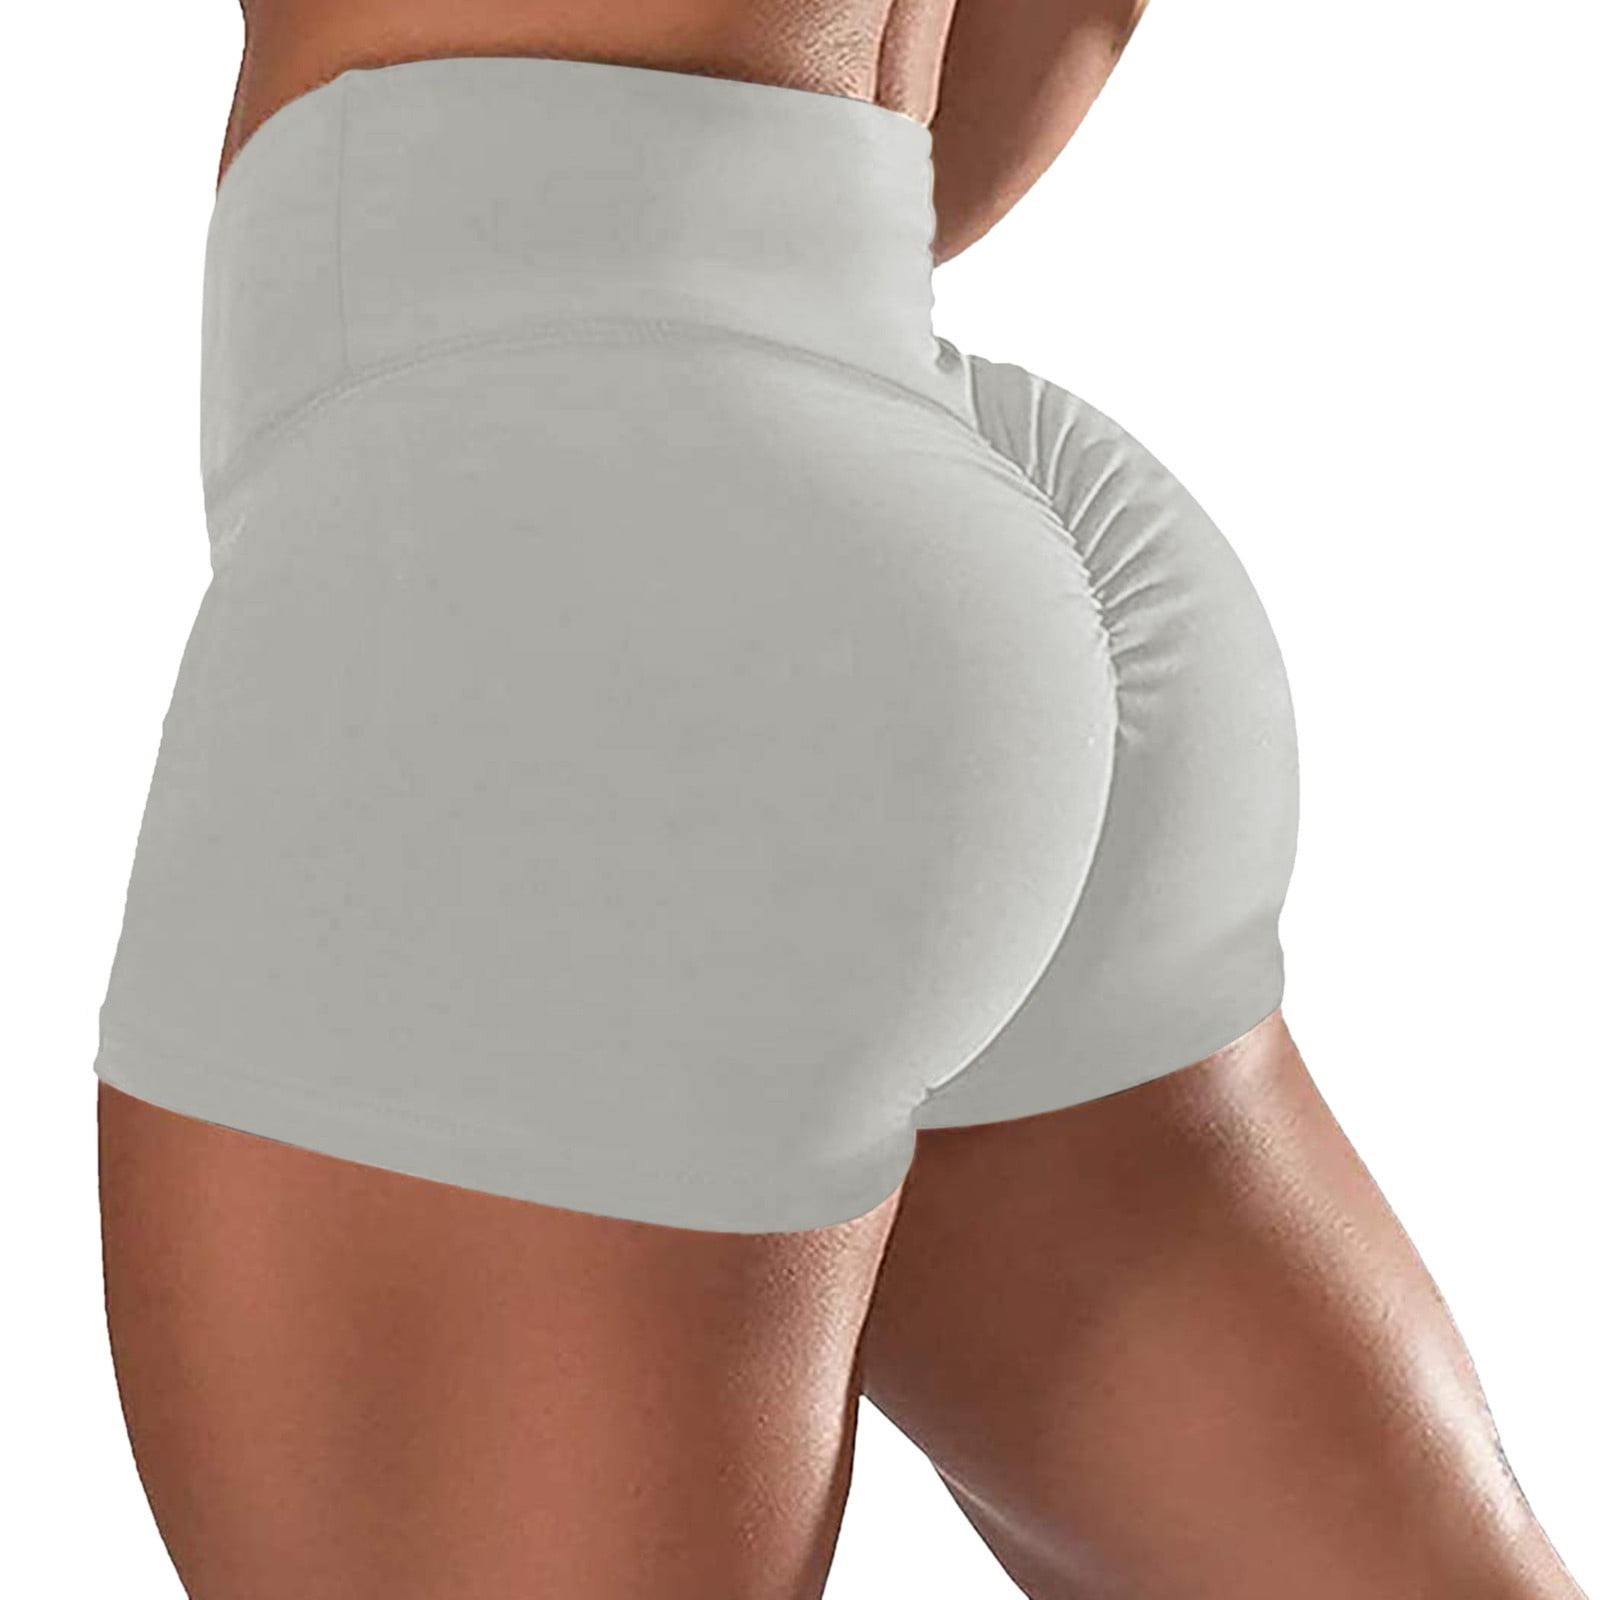 XFLWAM Workout Booty Spandex Shorts for Women Summer Solid Color